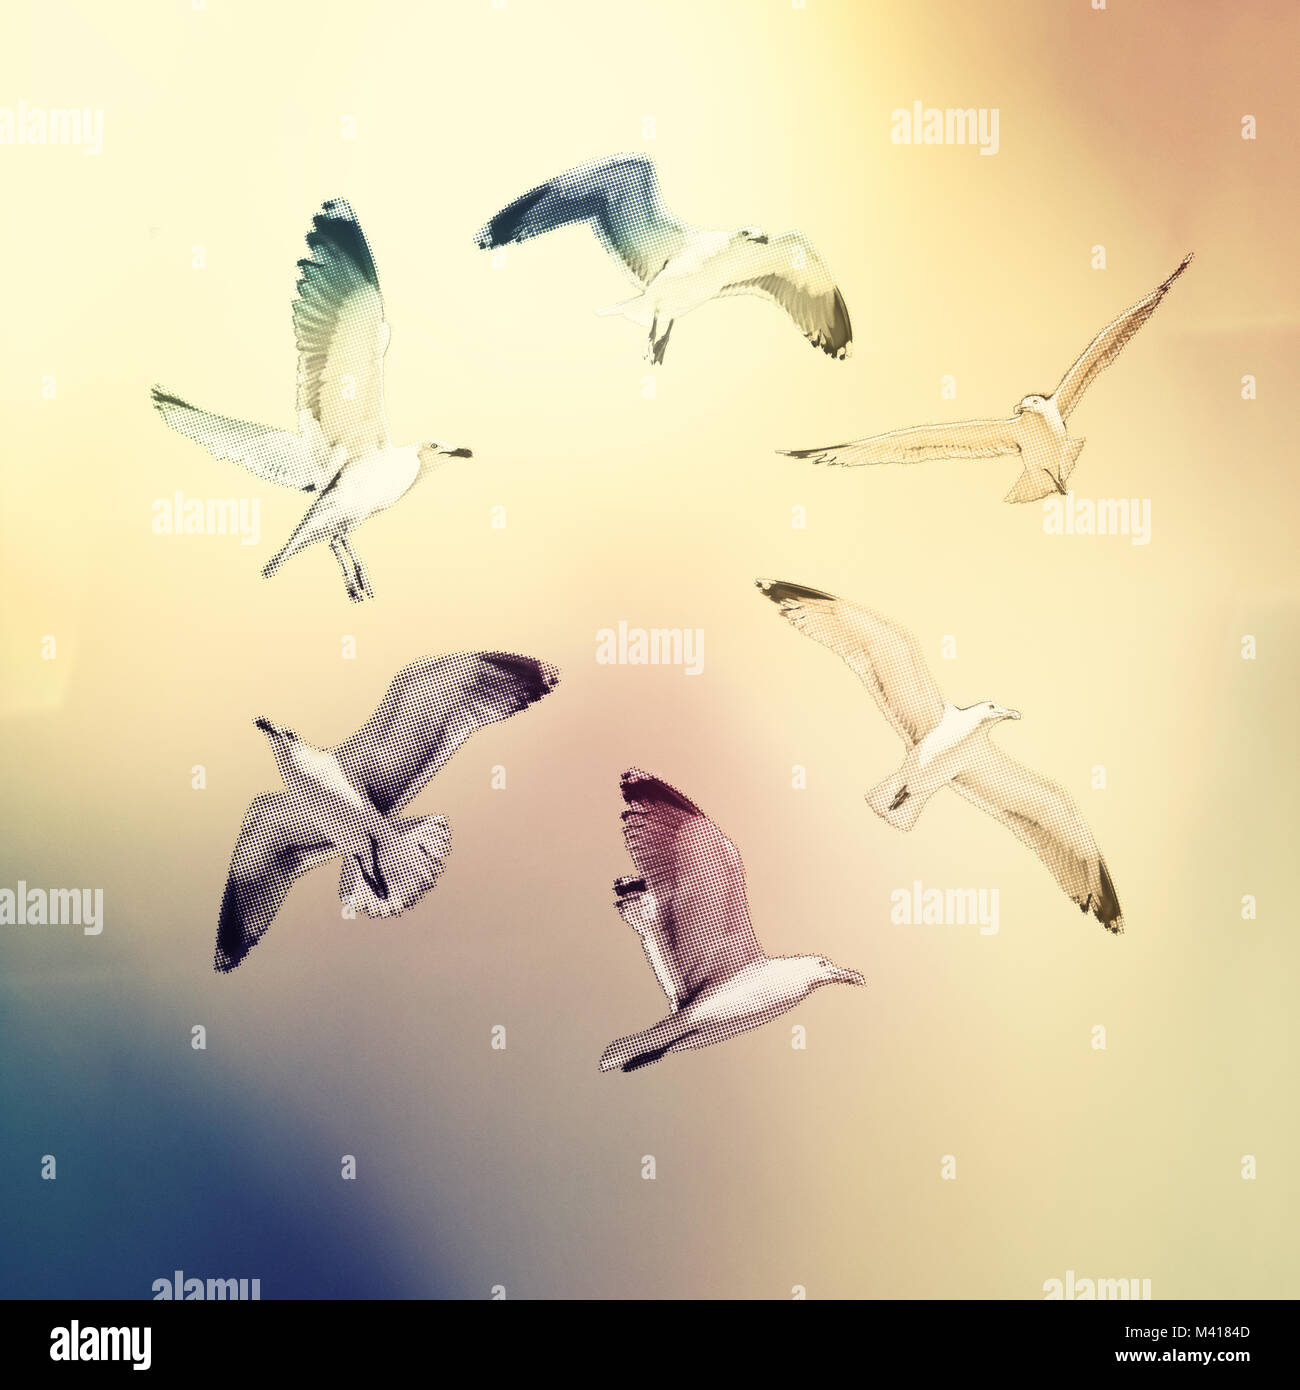 Illustration from flying seagulls in a circle on an abstract background Stock Photo